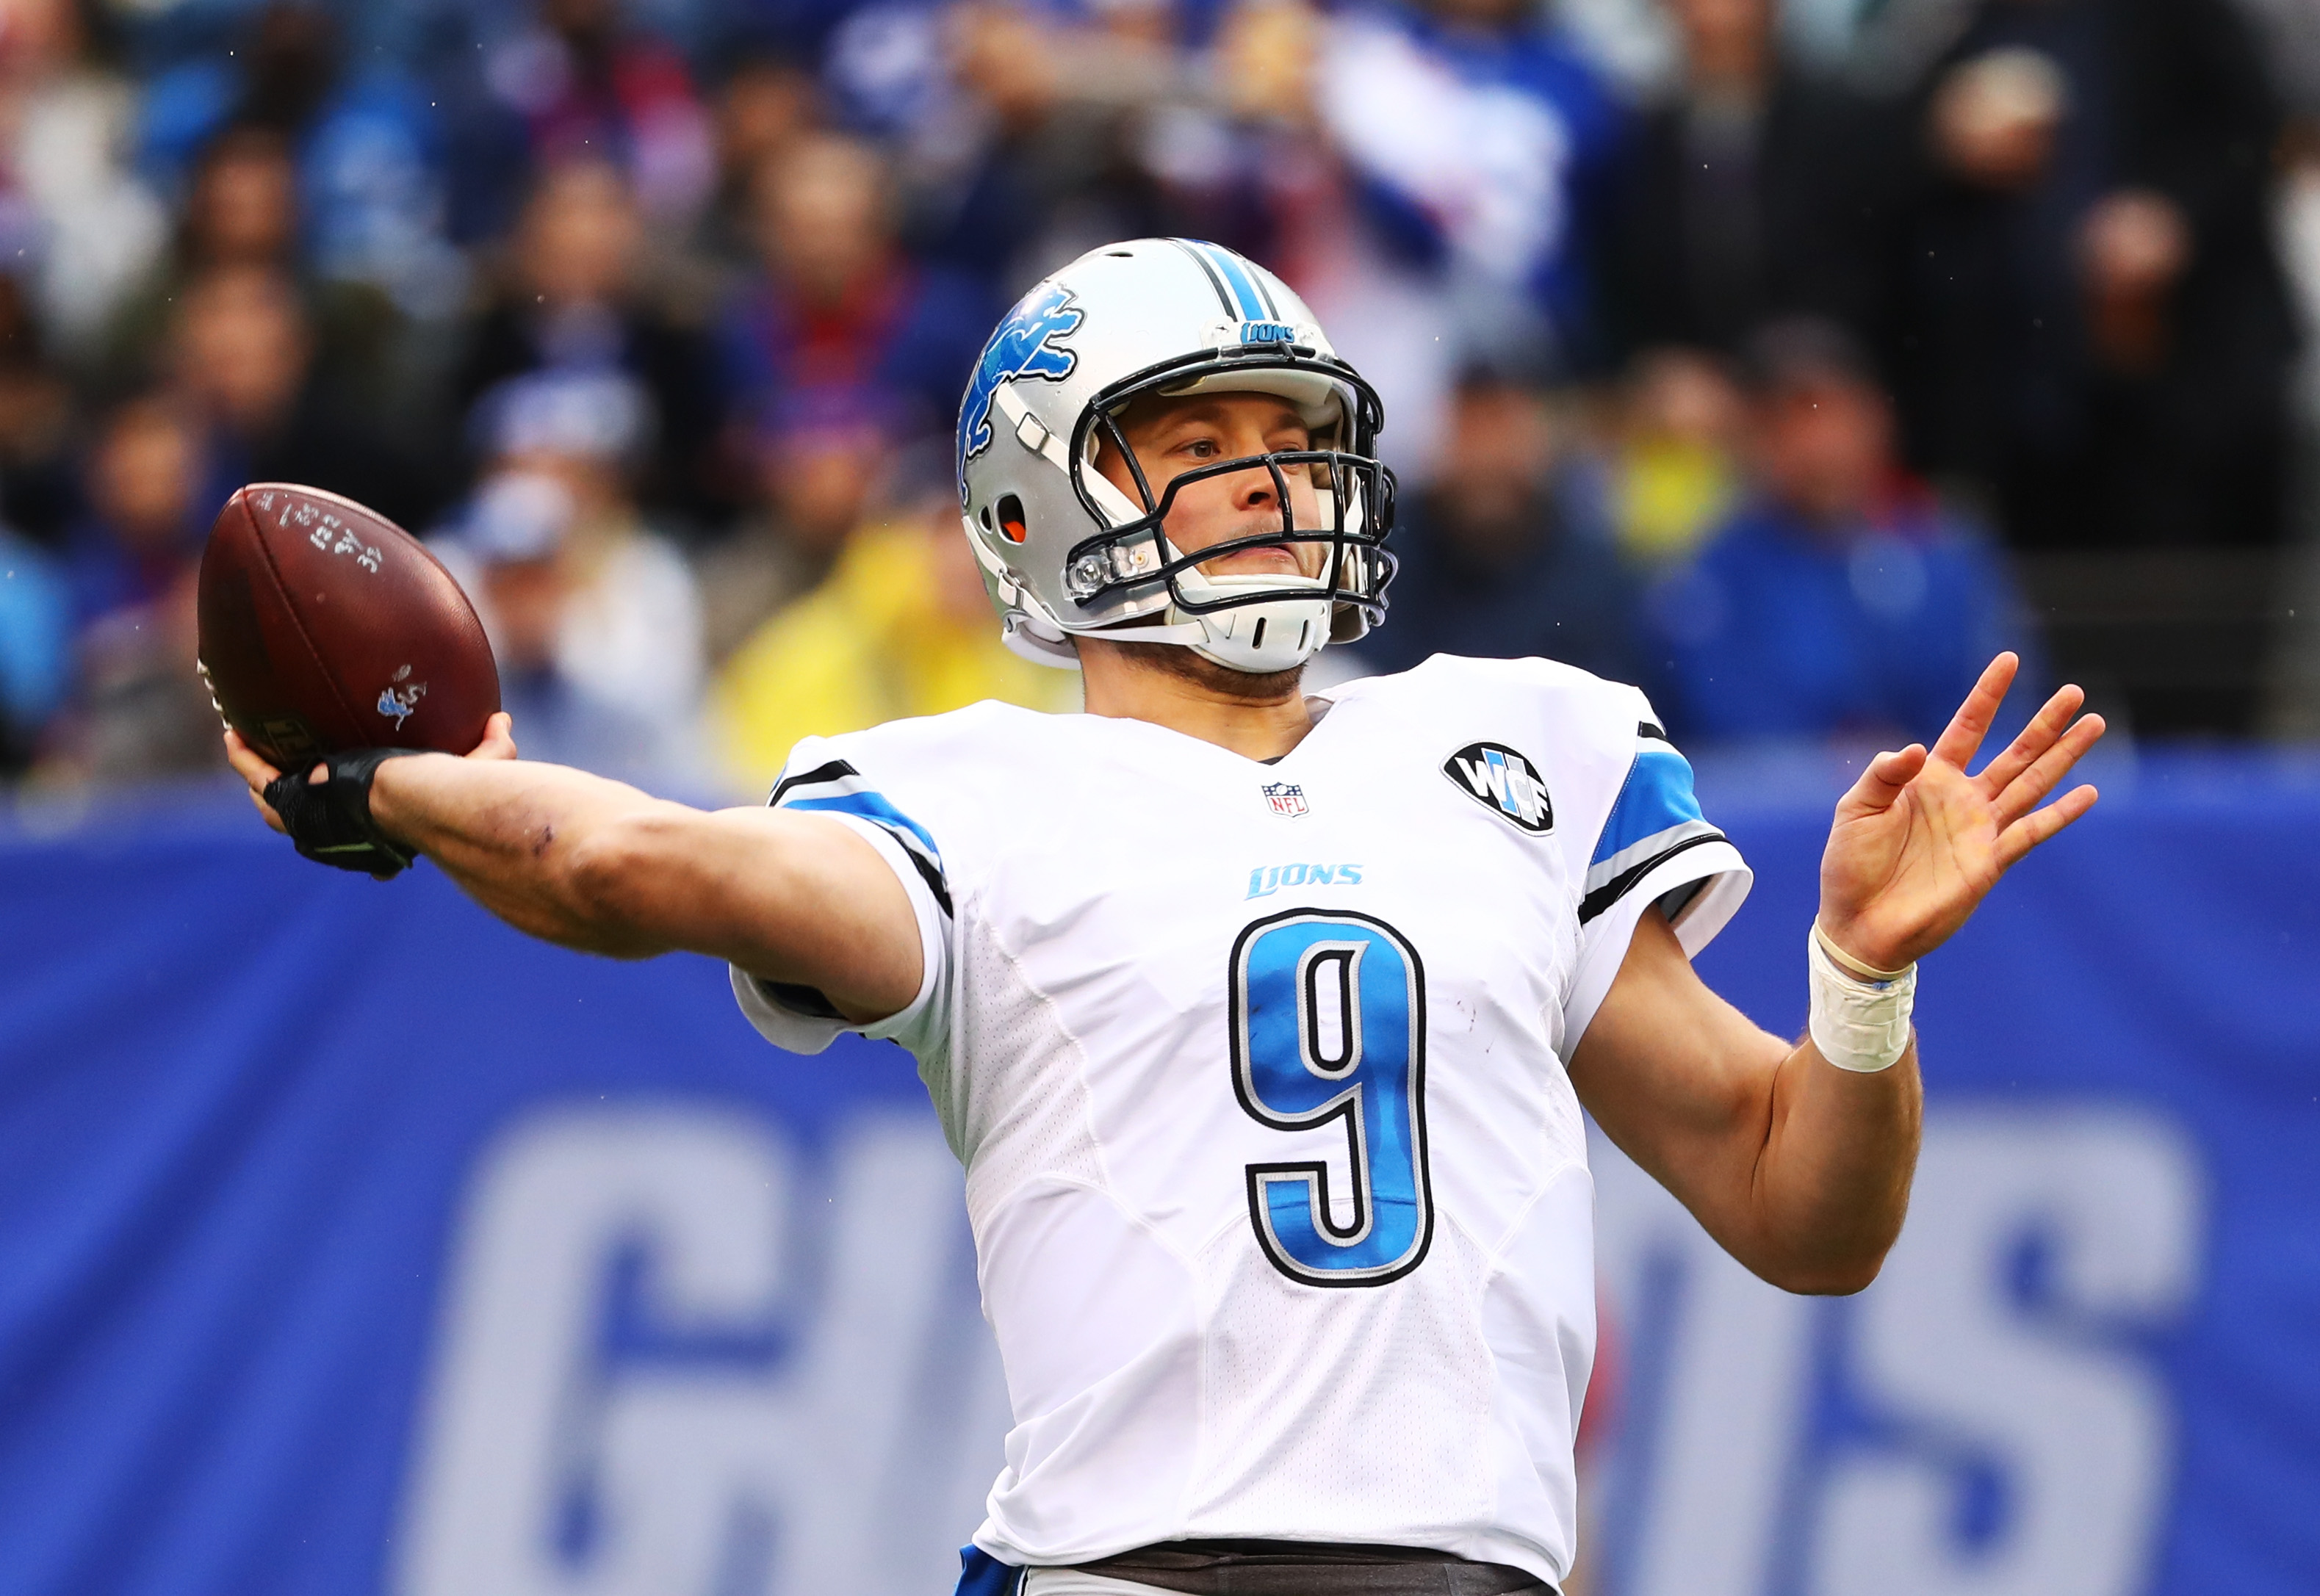 EAST RUTHERFORD, NJ - DECEMBER 18:  Matthew Stafford #9 of the Detroit Lions passes against the New York Giants  during their game at MetLife Stadium on December 18, 2016 in East Rutherford, New Jersey.  (